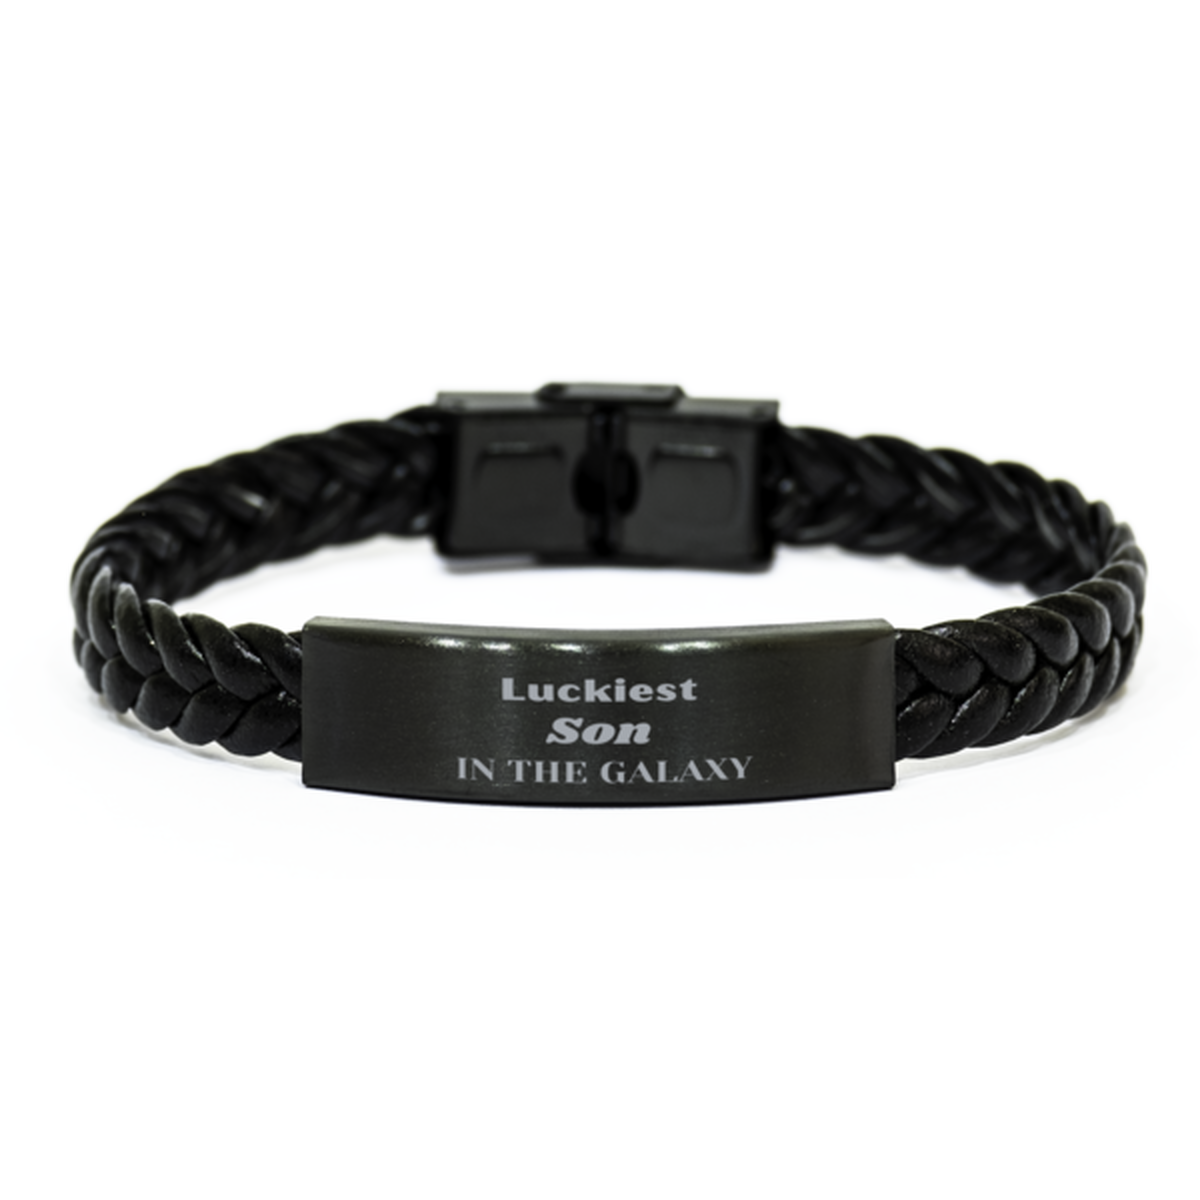 Luckiest Son in the Galaxy, To My Son Engraved Gifts, Christmas Son Braided Leather Bracelet Gifts, X-mas Birthday Unique Gifts For Son Men Women